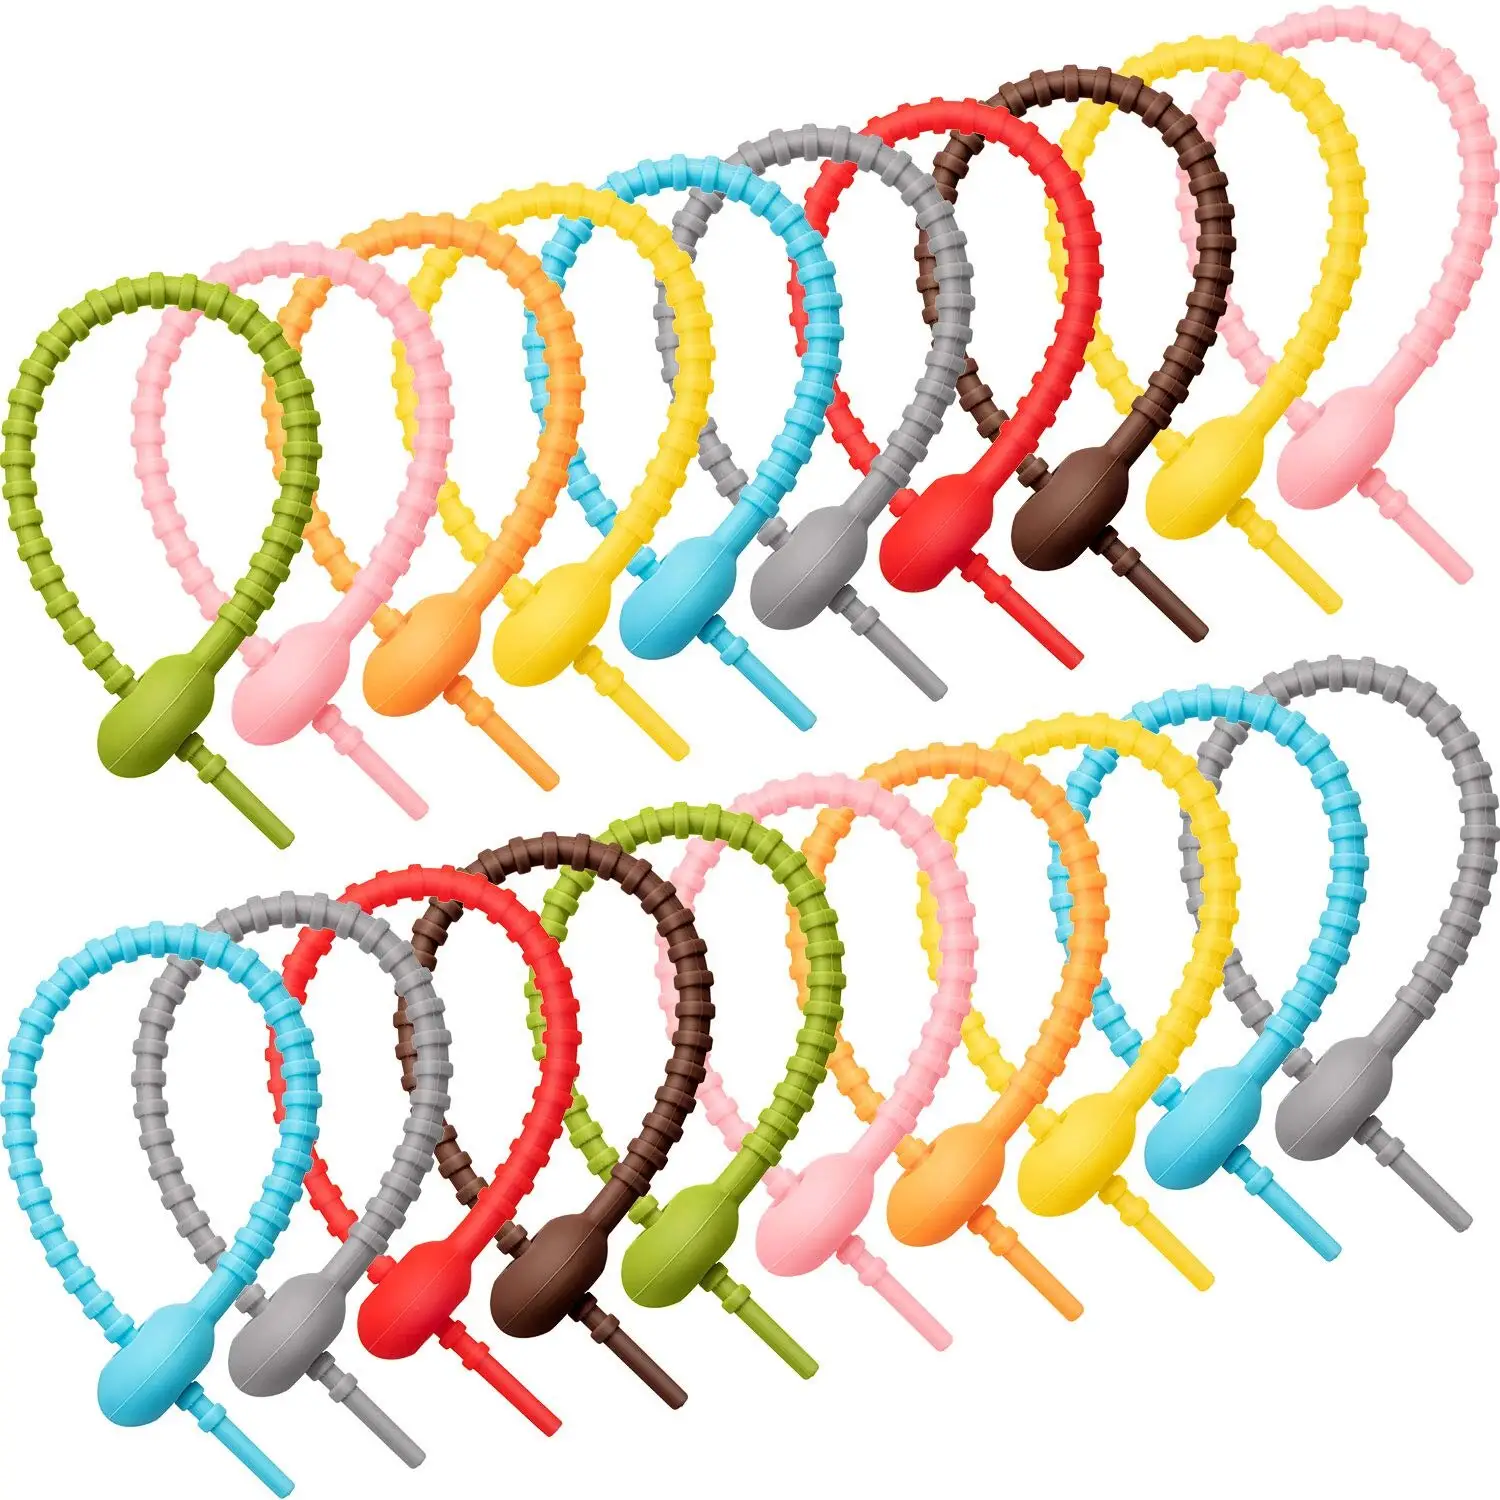 Hot Selling Colorful Reusable Silicone Cable Tie Multi Purpose Flexible Cable Ties Binding Cord Straps Organizer